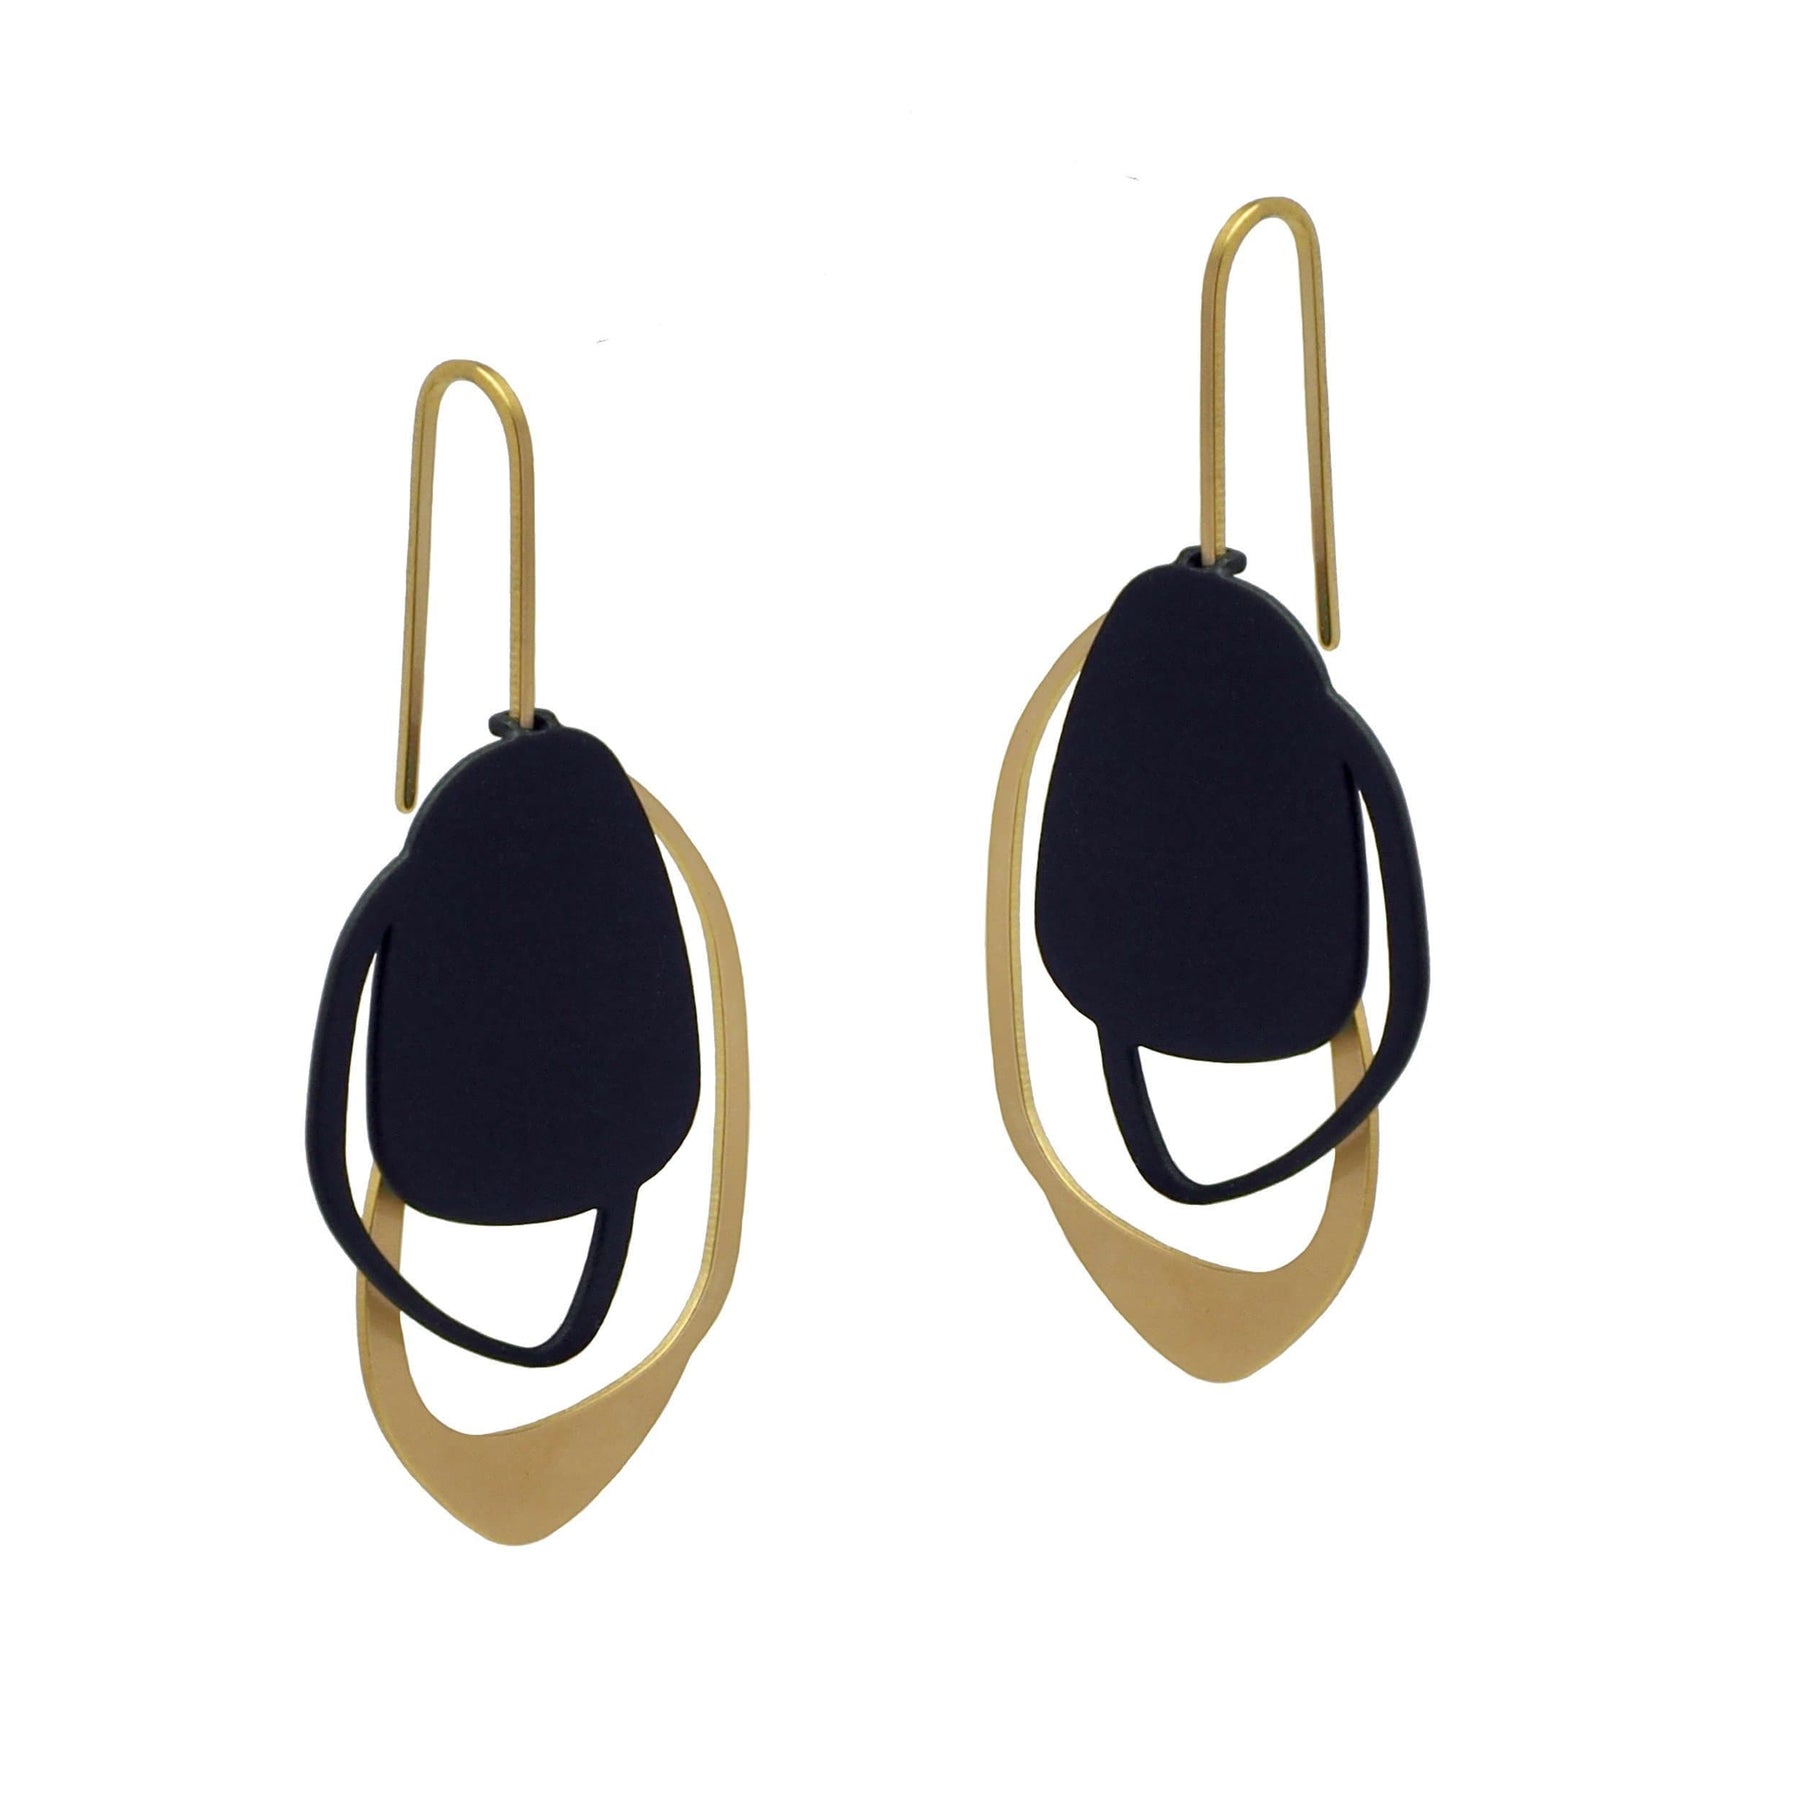 Buy X2 Raw/ Black Stone Earrings From InSyncDesign Online - inSync design